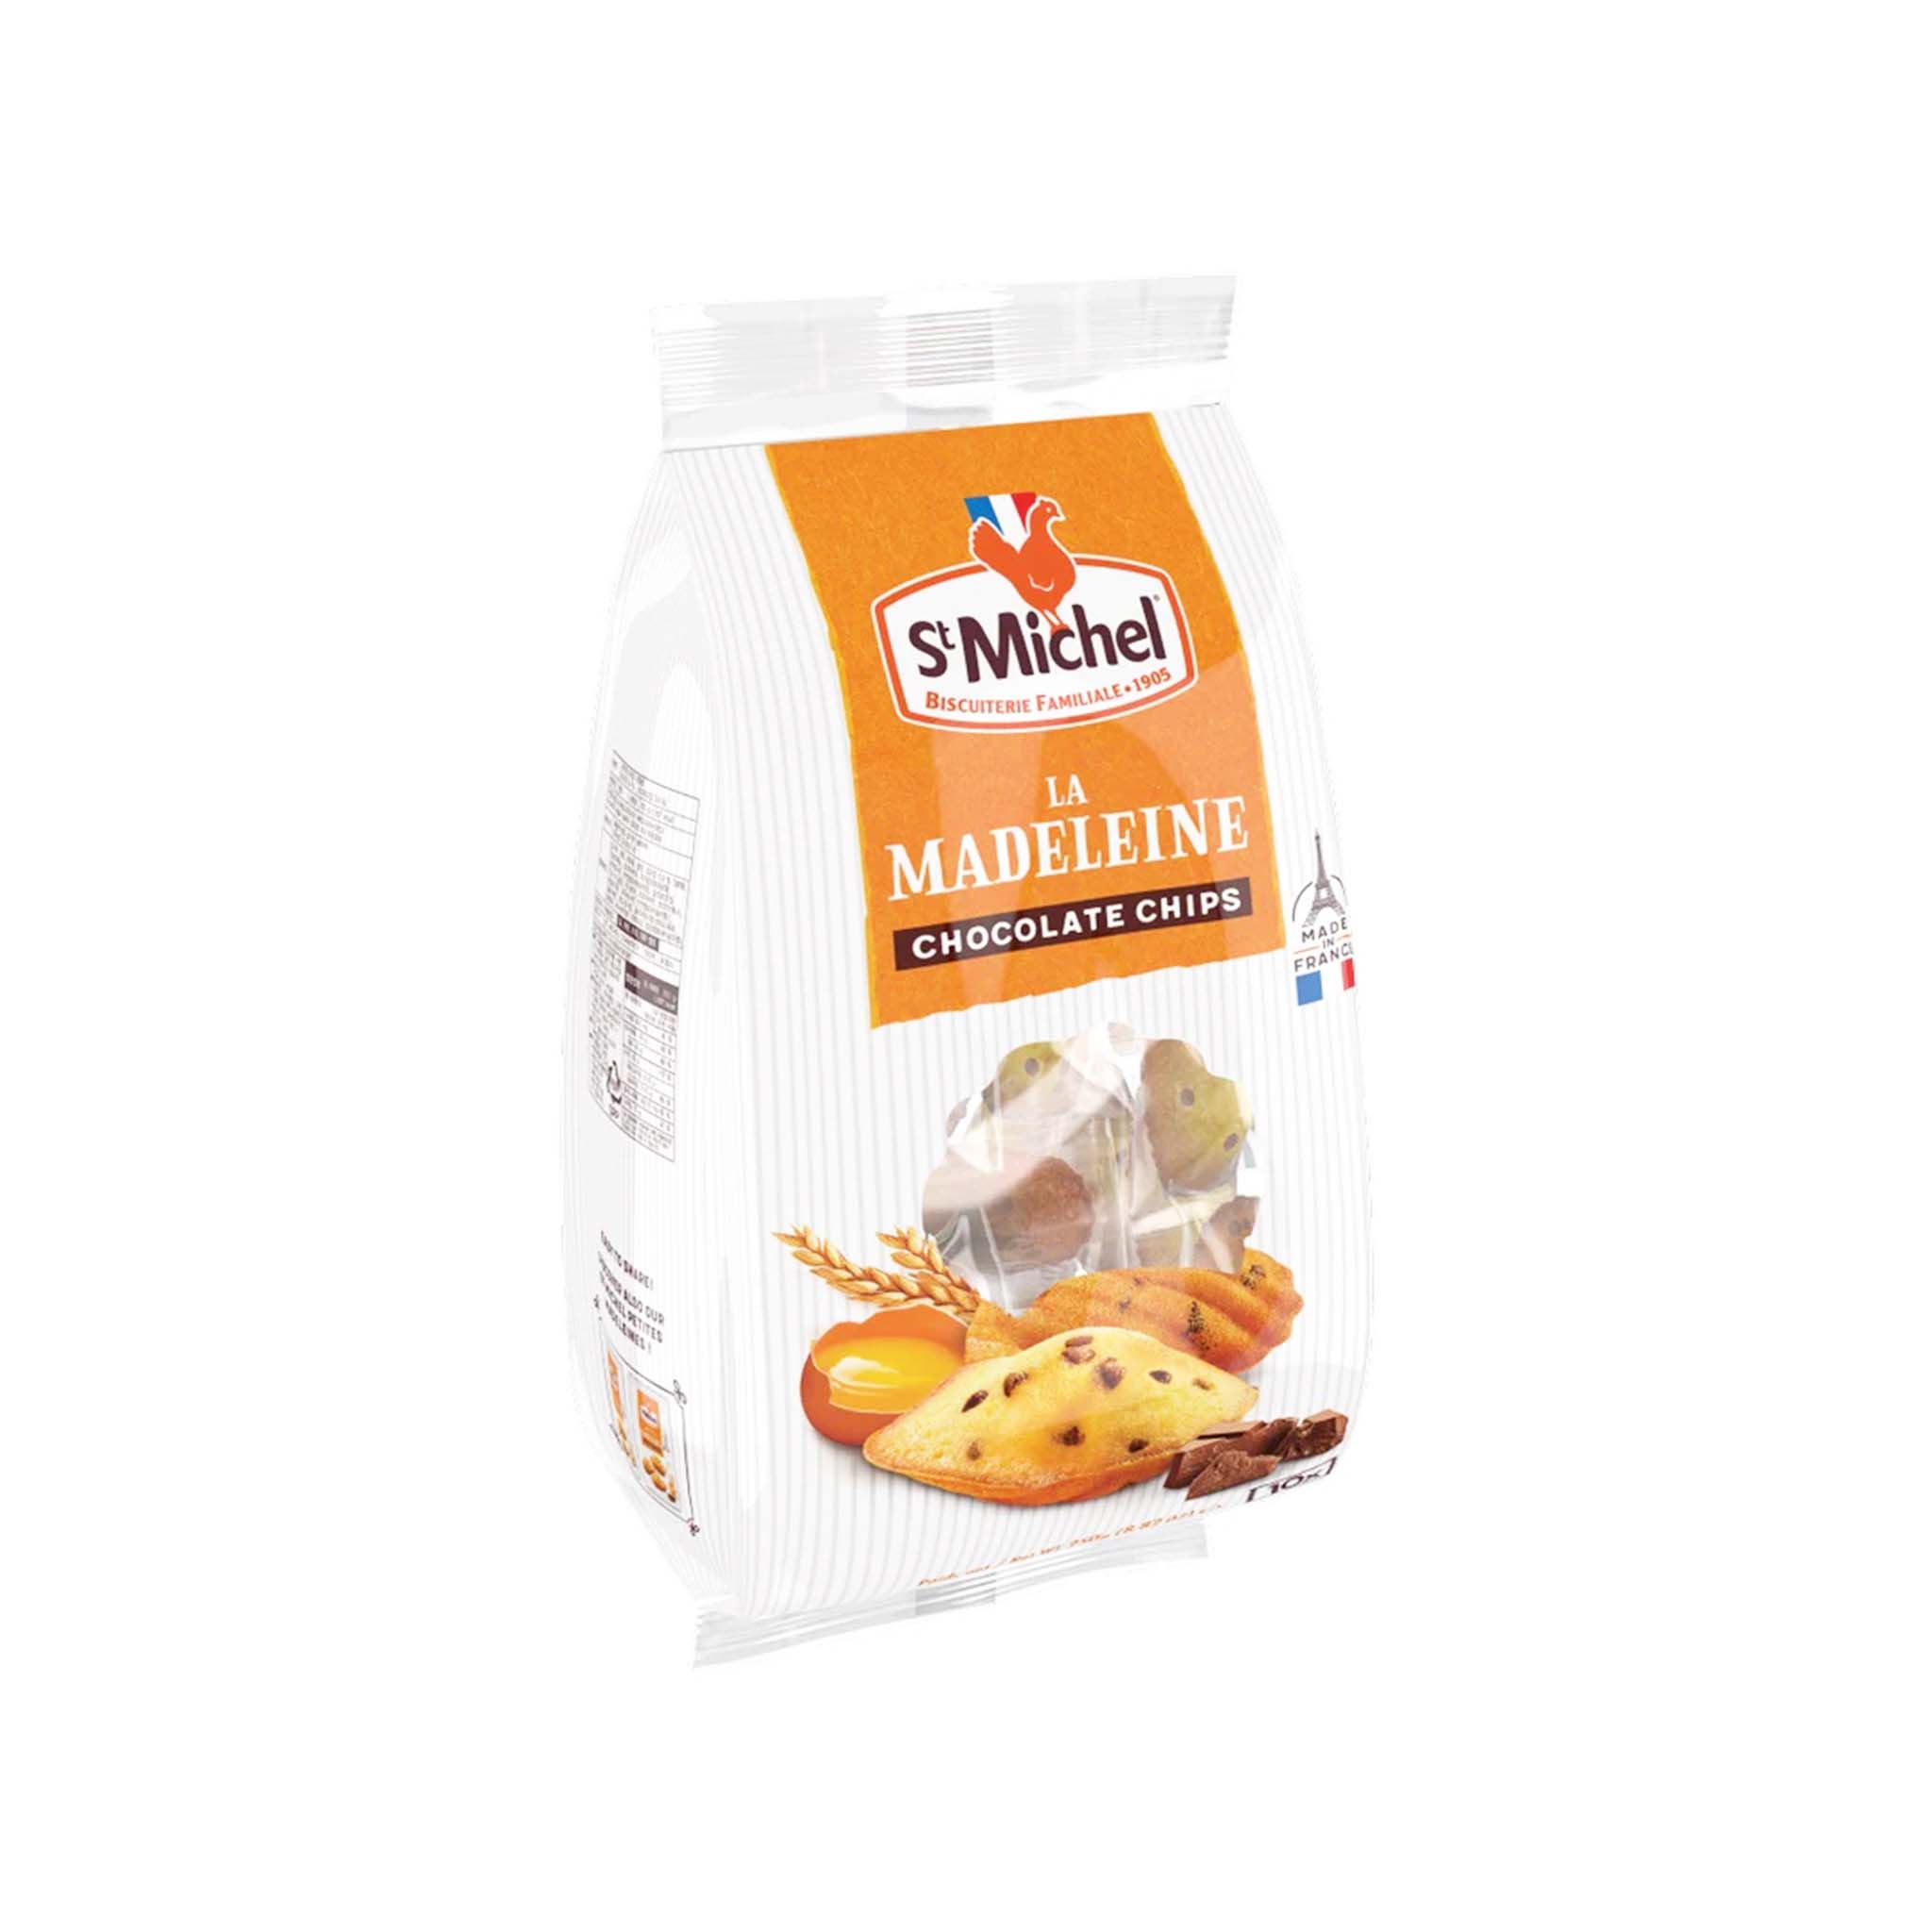 ST MICHEL MADELEINES WITH CHOCOLATE CHIPS 250g